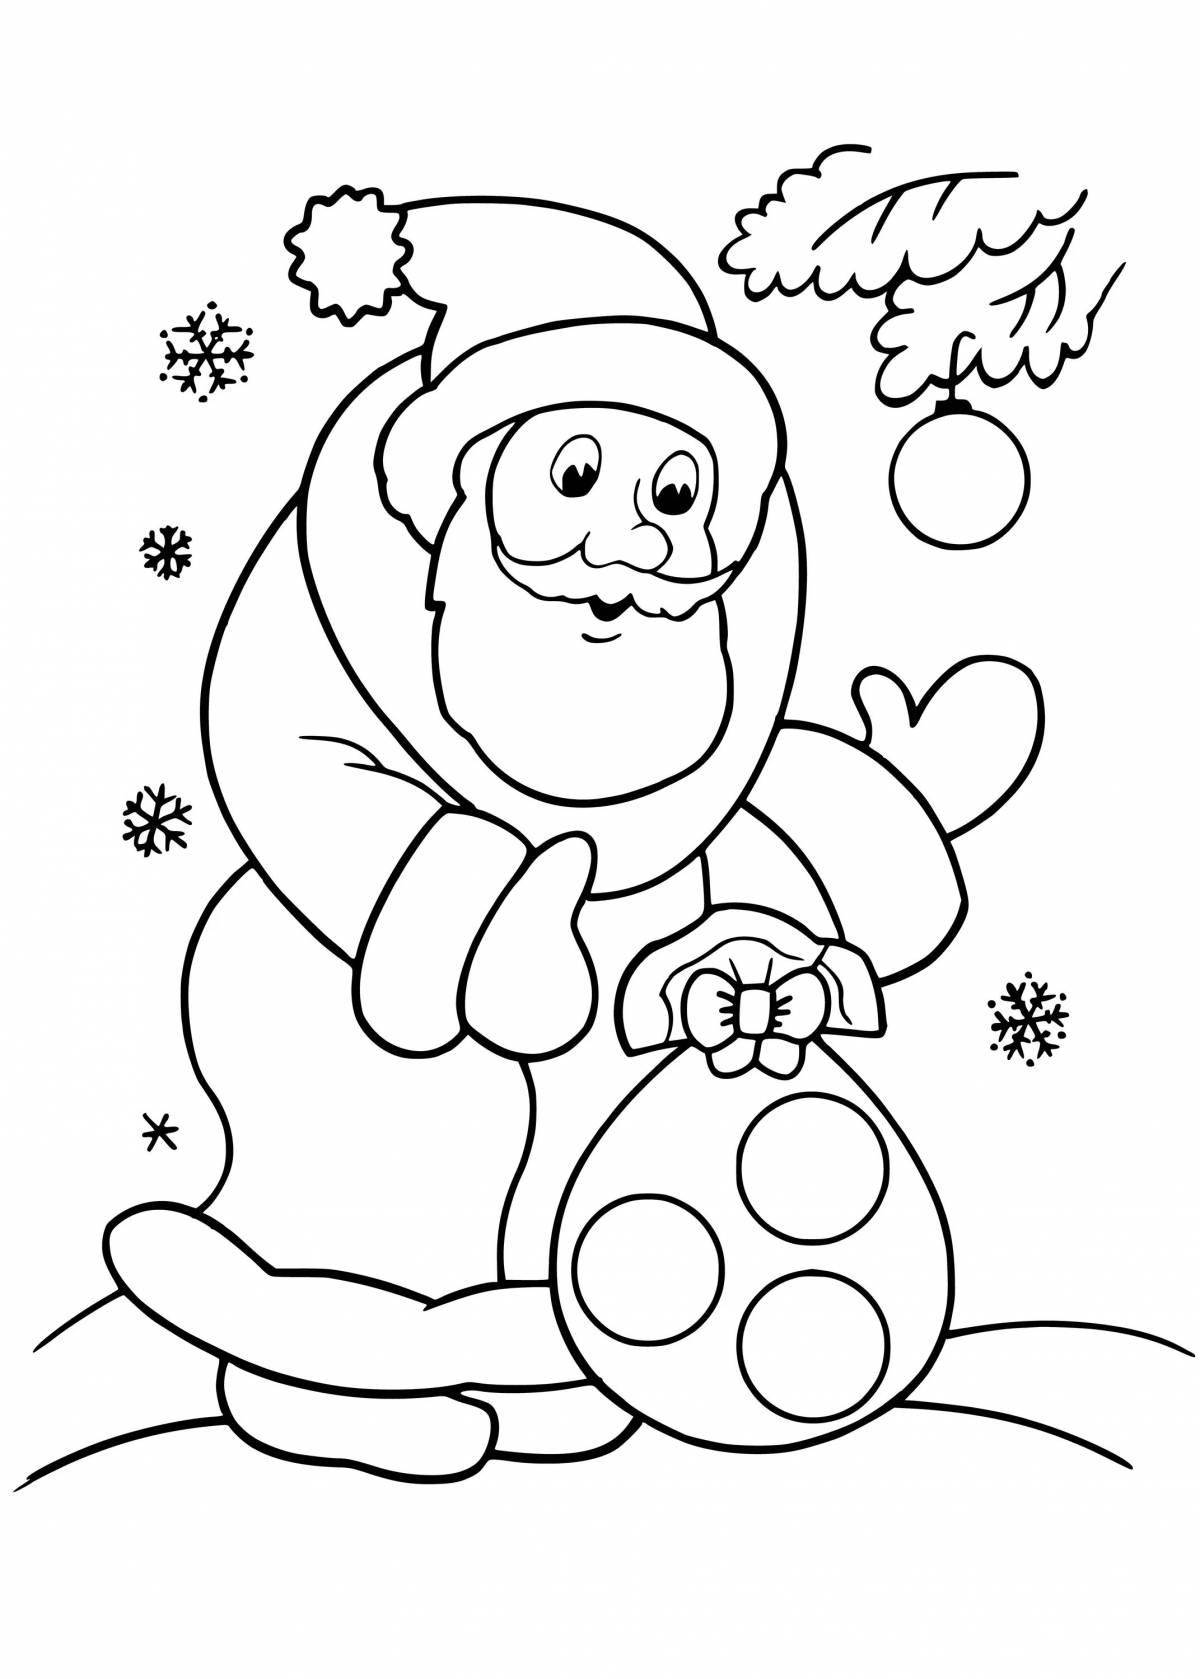 Cute Christmas coloring book for 6-7 year olds